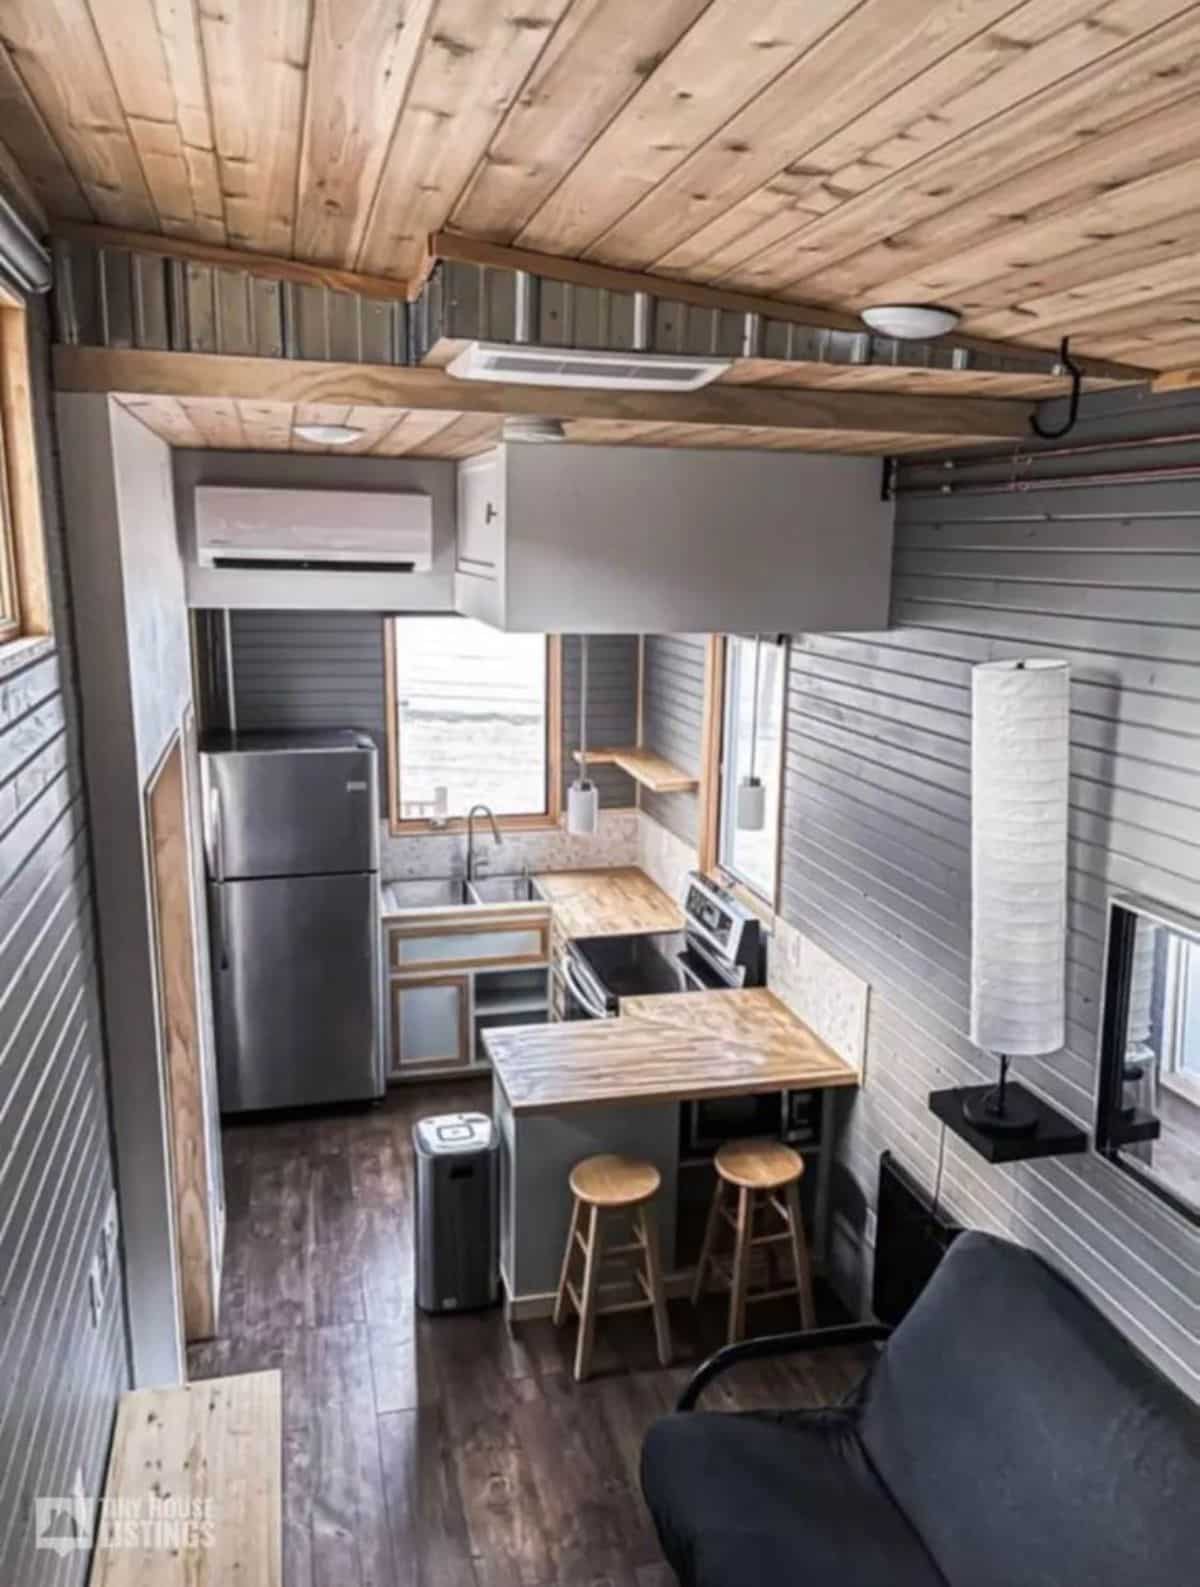 Extension to countertop of kitchen of Professionally Built 30' Tiny House is utilized as dining area